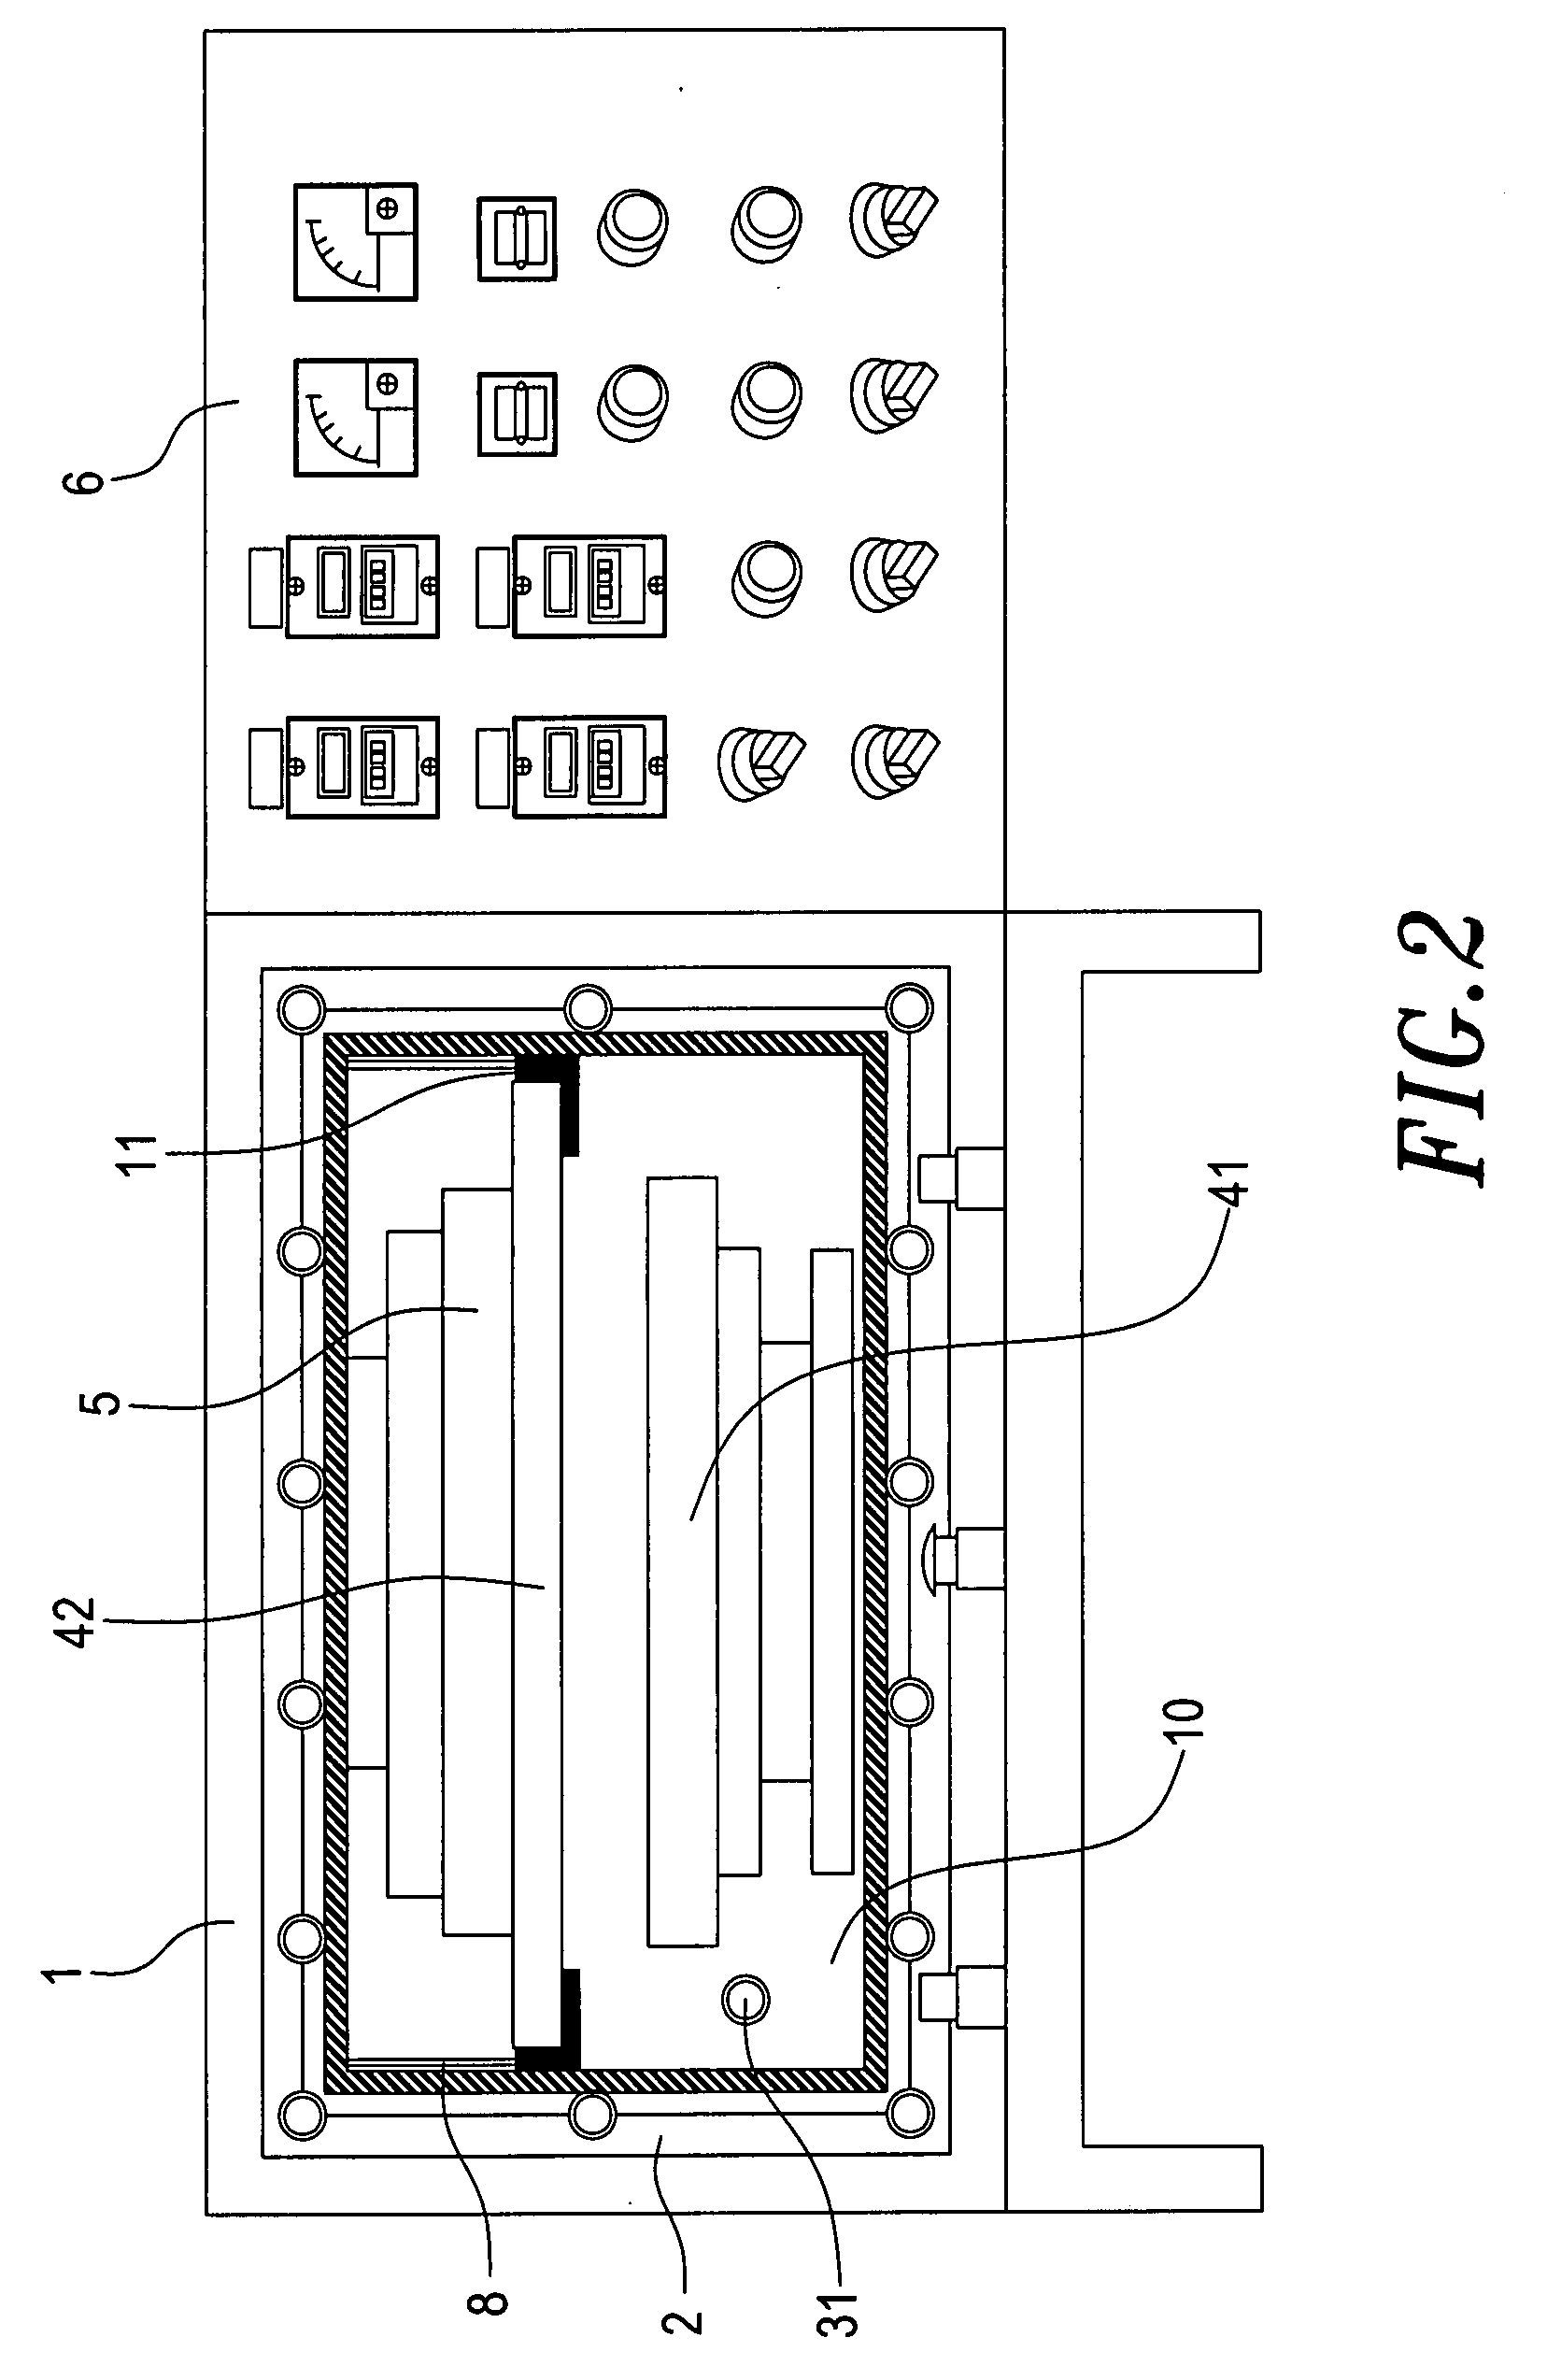 Fluid Enveloping Device and Method for Enveloping fluid with Thin Films